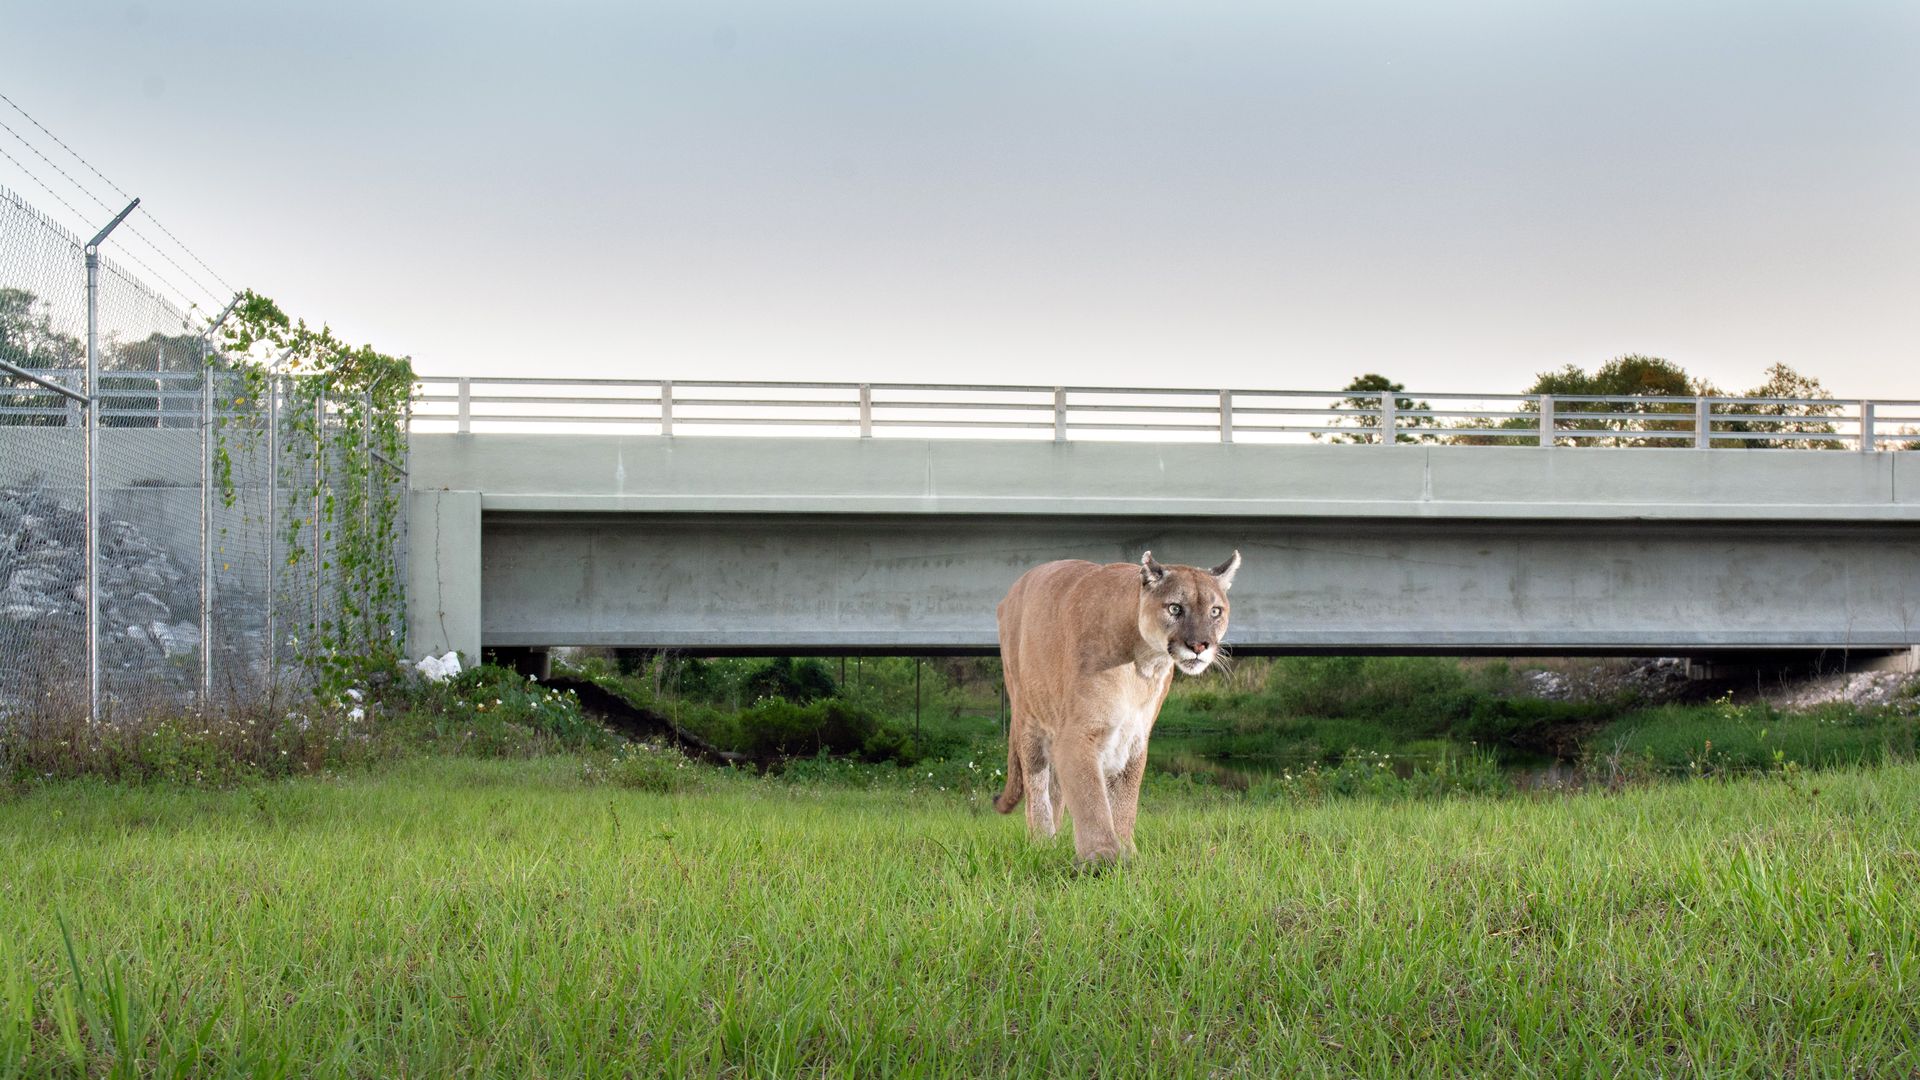 A Florida panther walks near a fence and highway.